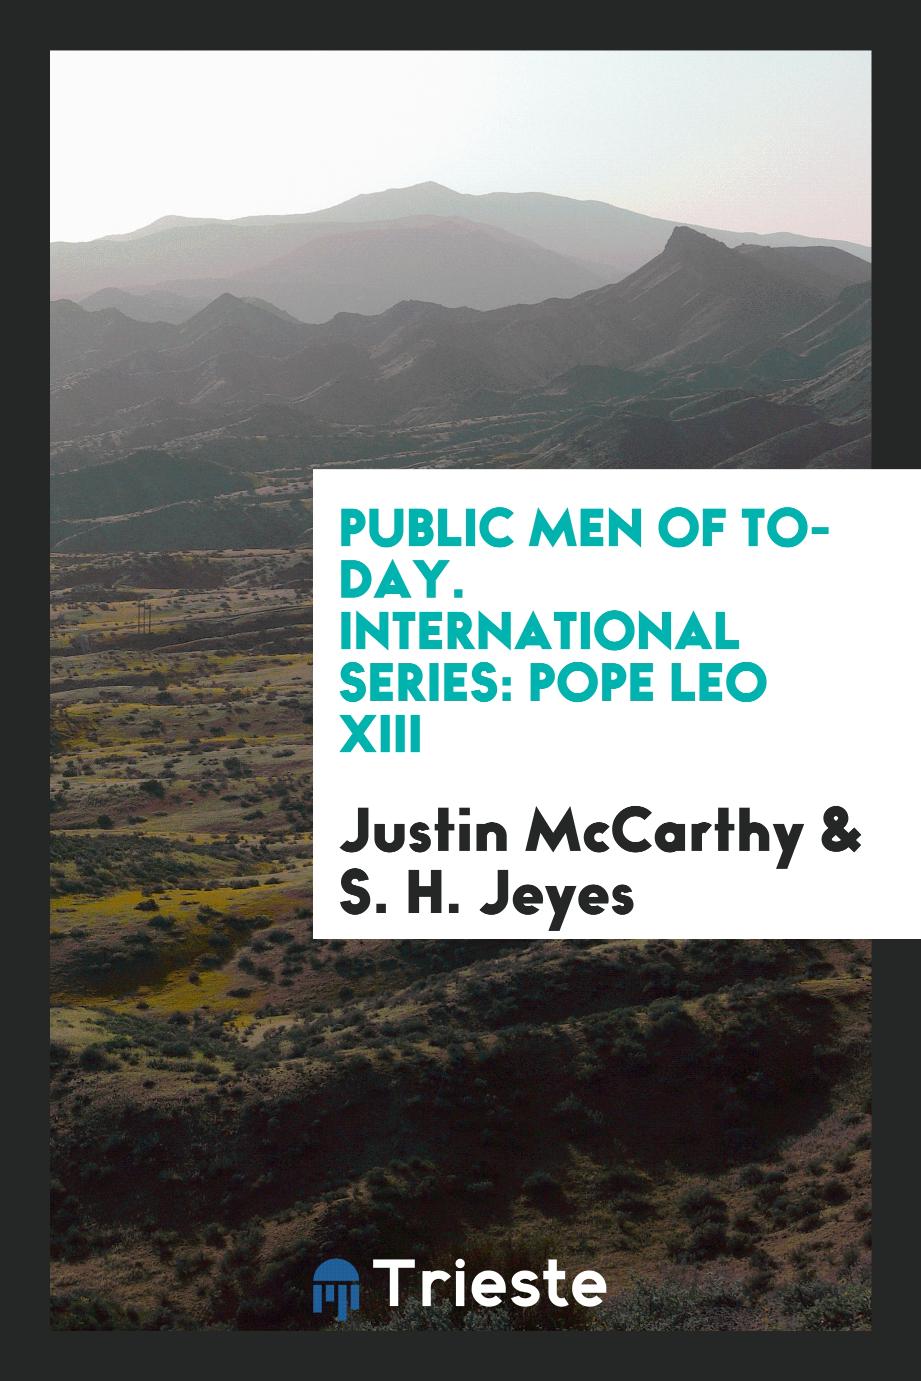 Public Men of To-Day. International Series: Pope Leo XIII